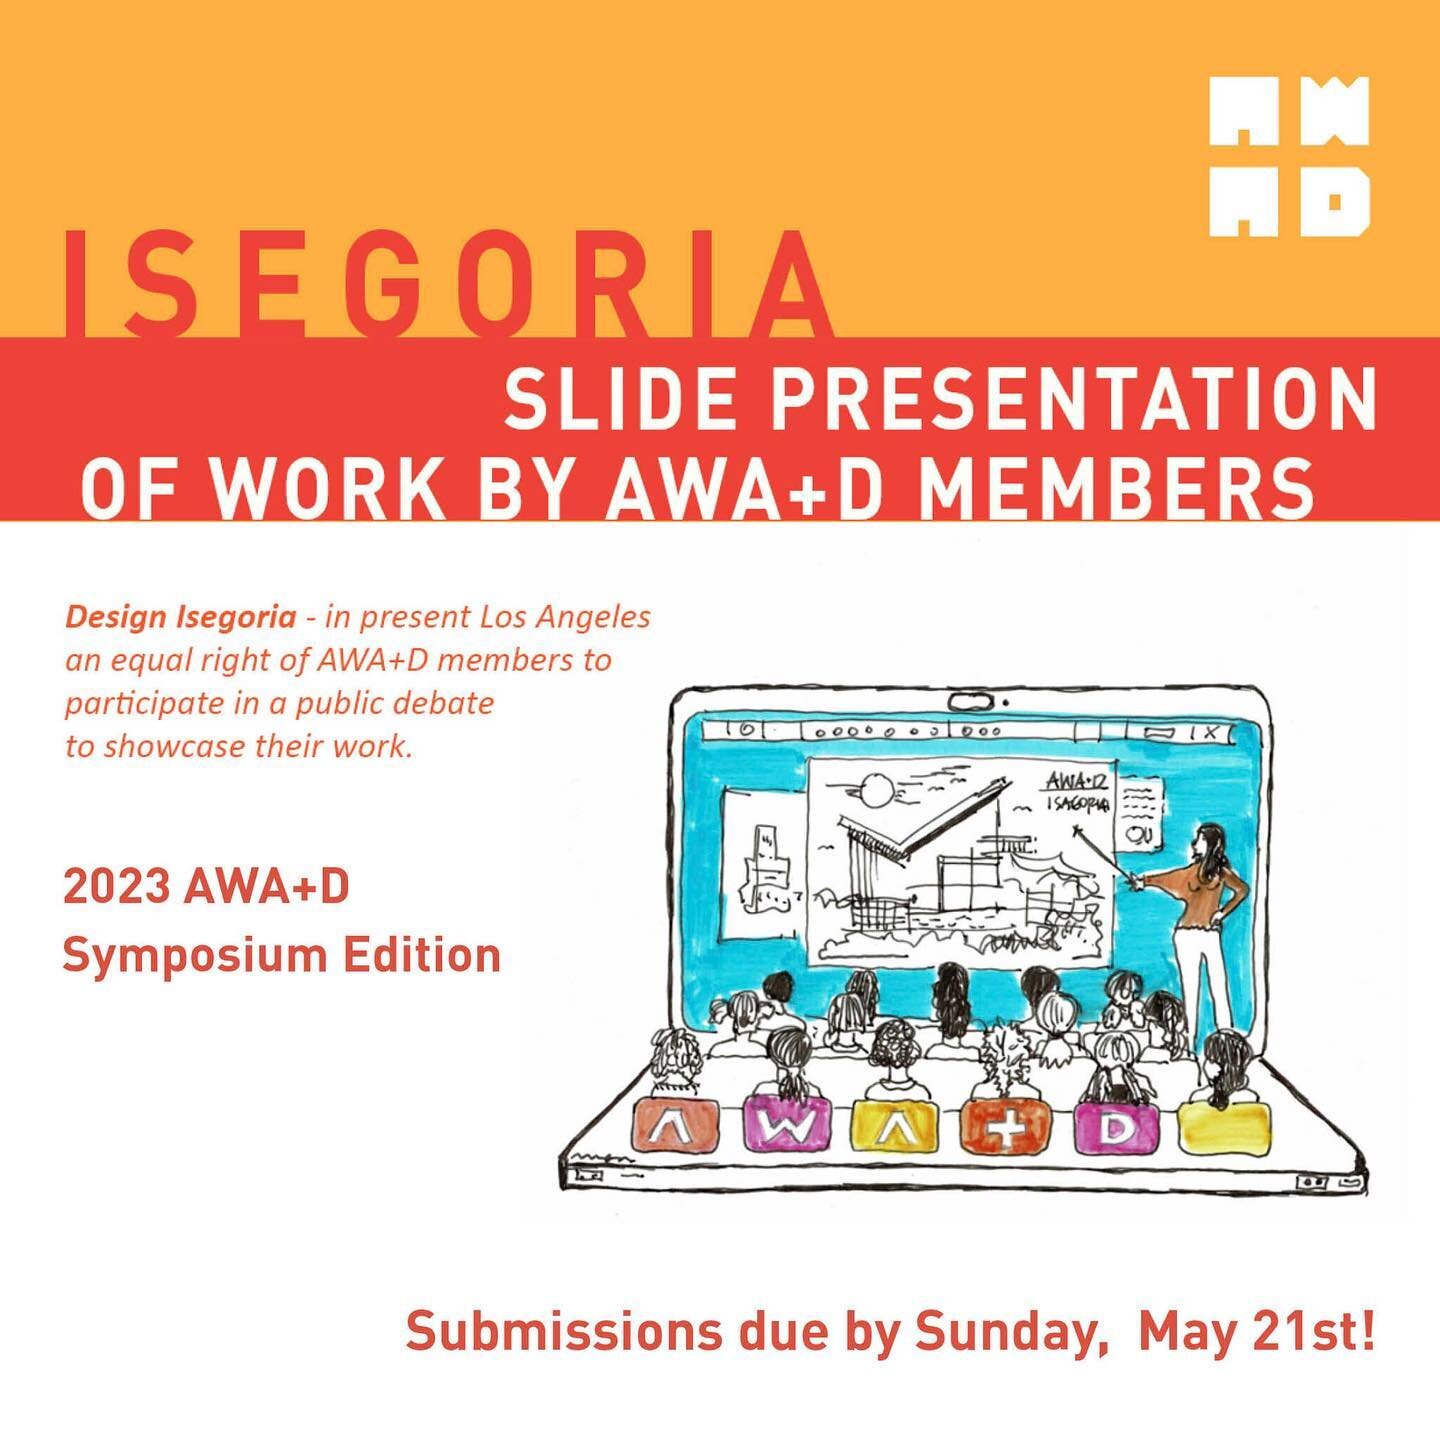 We want to showcase your work! ✨🖼️

Submit your work to be featured in our 4th Isegoria event. AWA members are able to learn about each other&rsquo;s work and celebrate women&rsquo;s contributions to our society. 

Don&rsquo;t miss AWA+D Symposium c